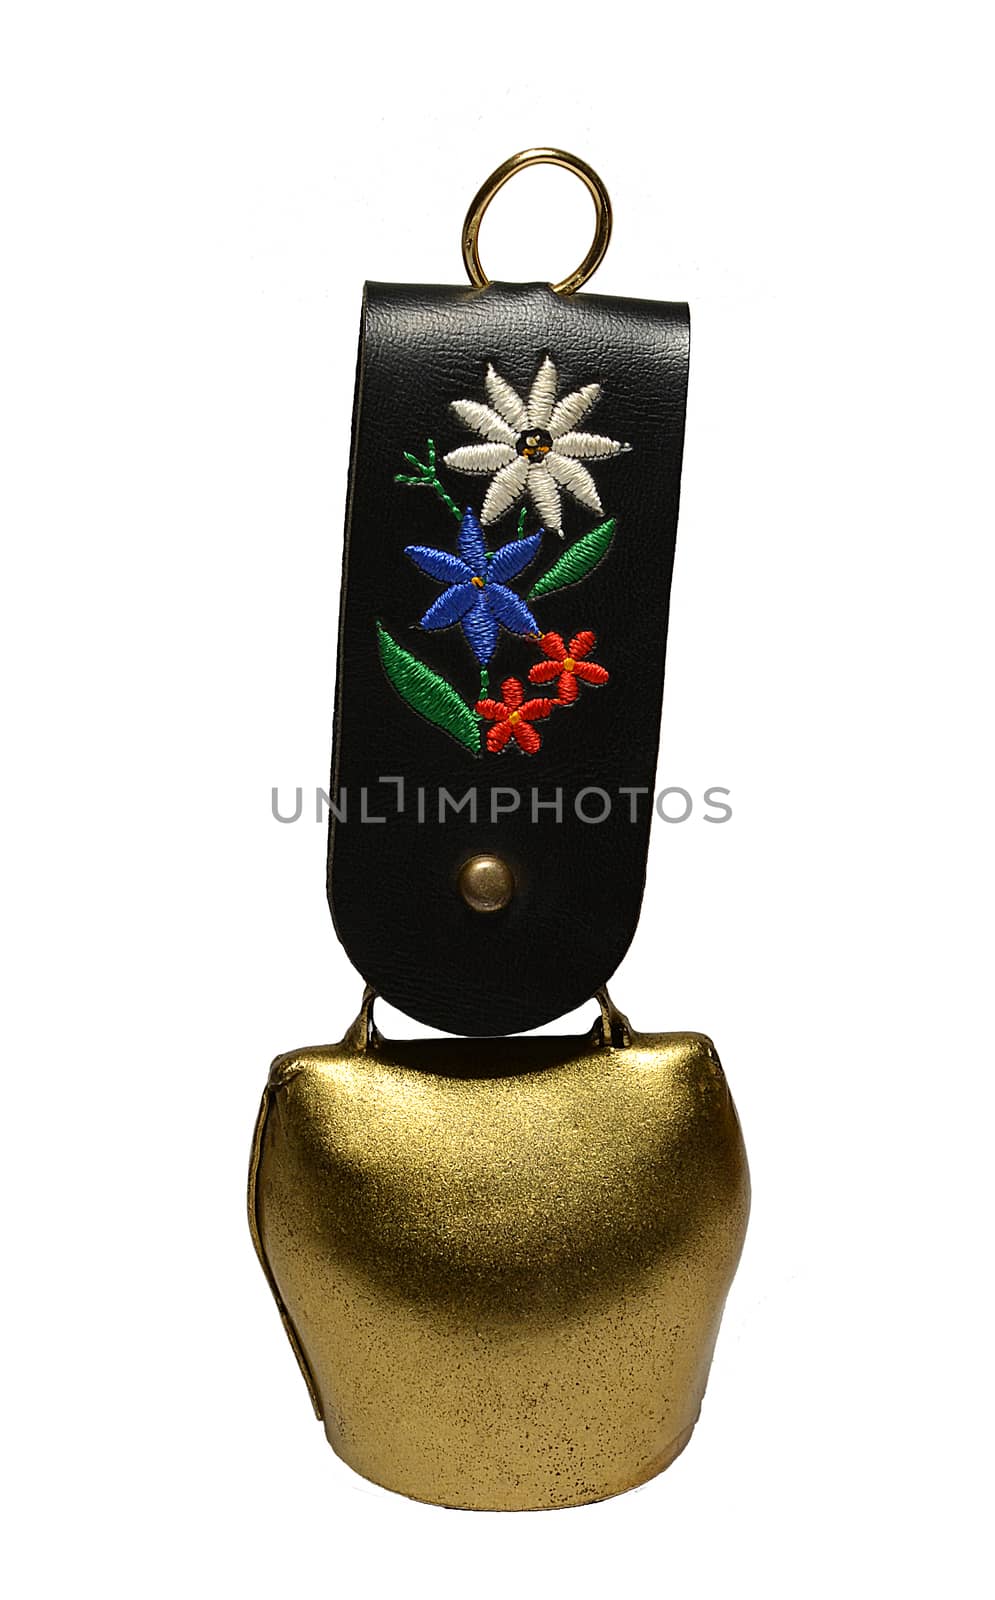 Switzerland decorative bell with a flower.